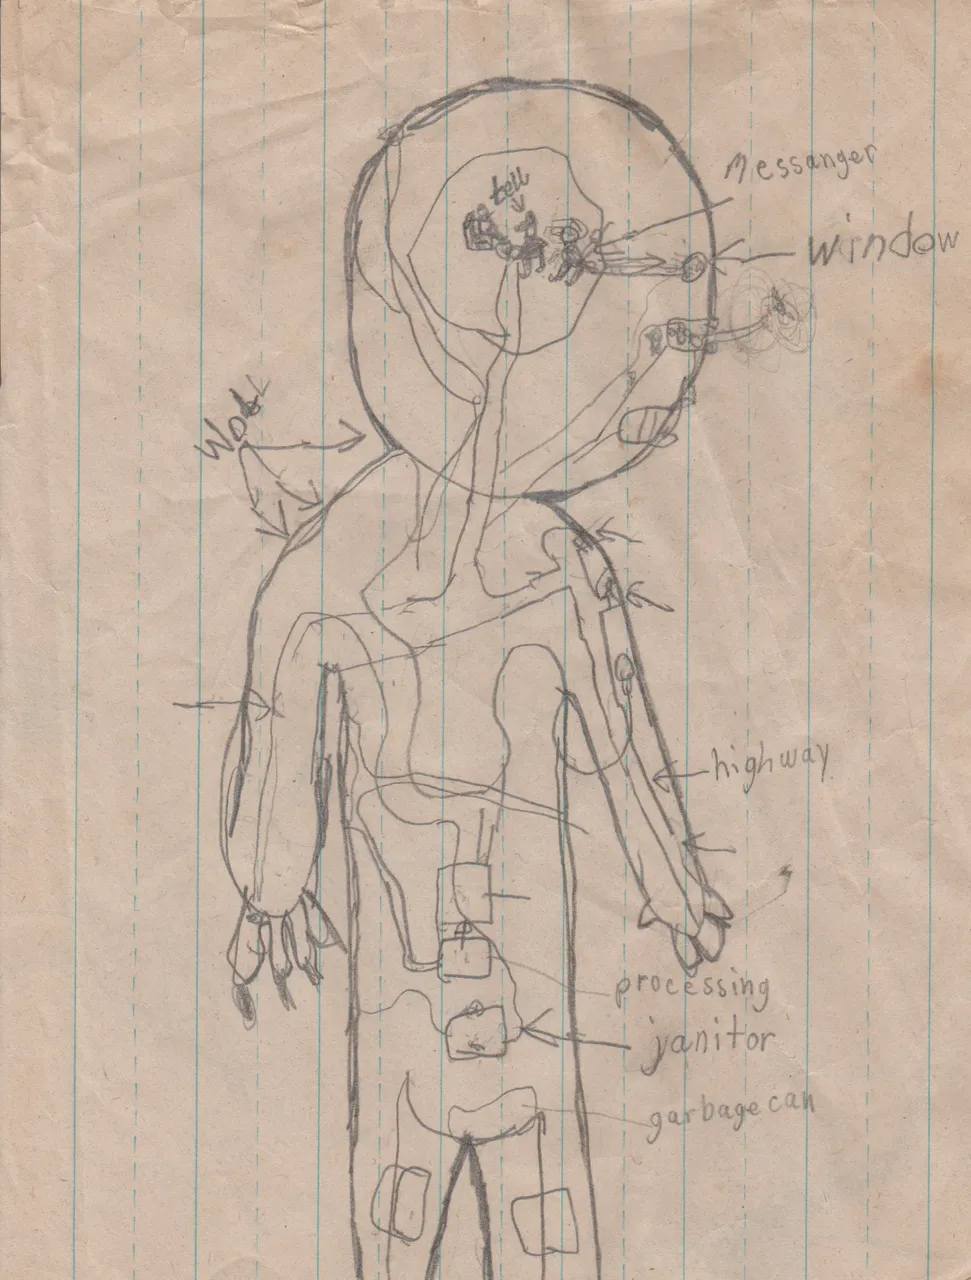 1993 maybe Robot Diagram.png